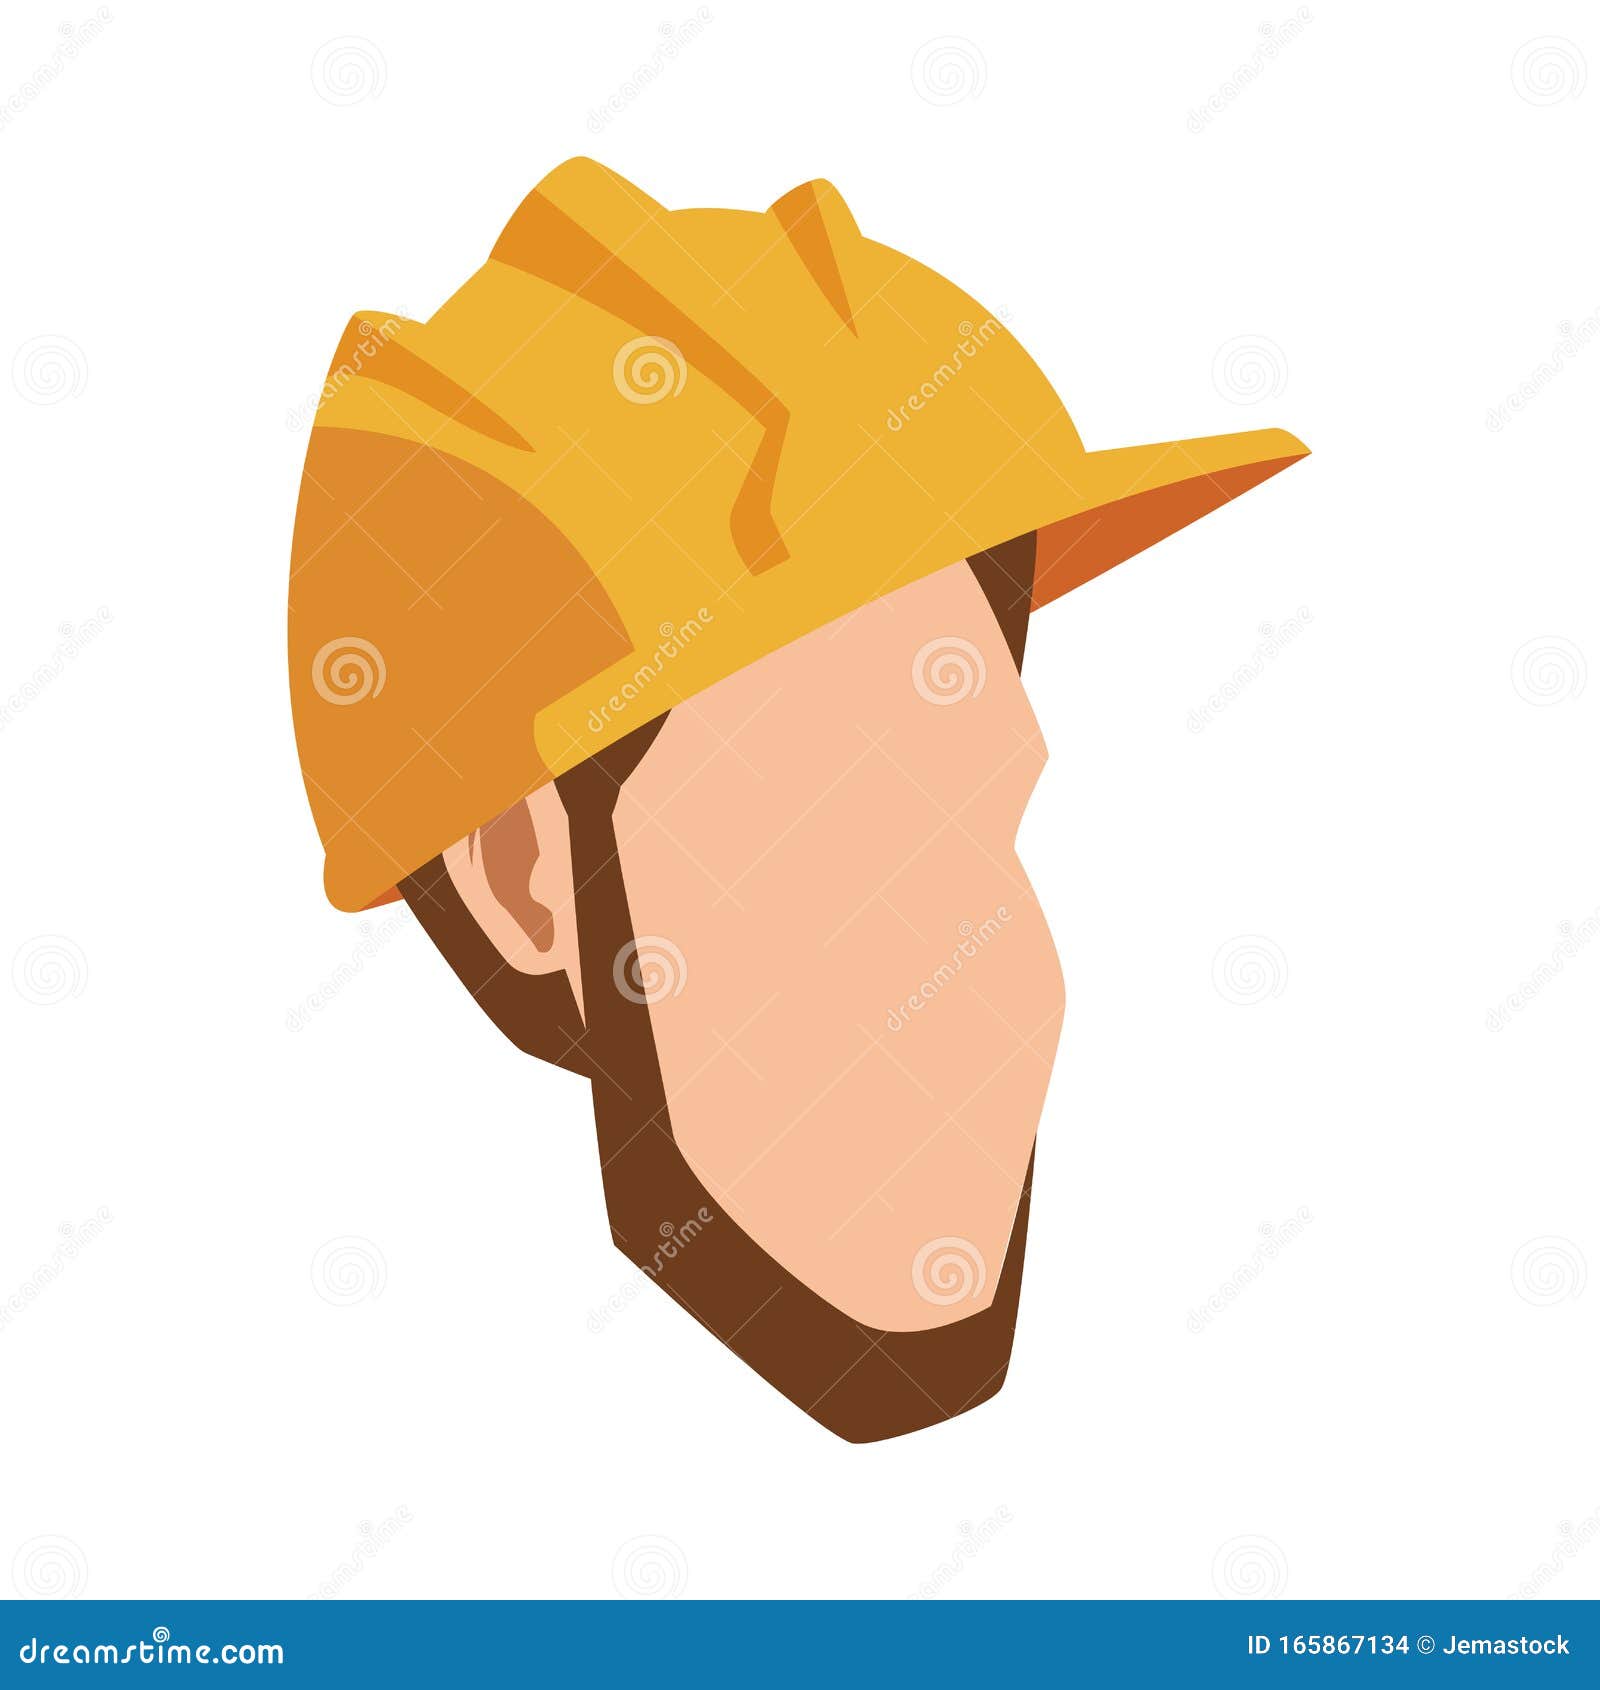 Cartoon Man with Safety Helmet Icon Stock Vector - Illustration of plastic,  safety: 165867134